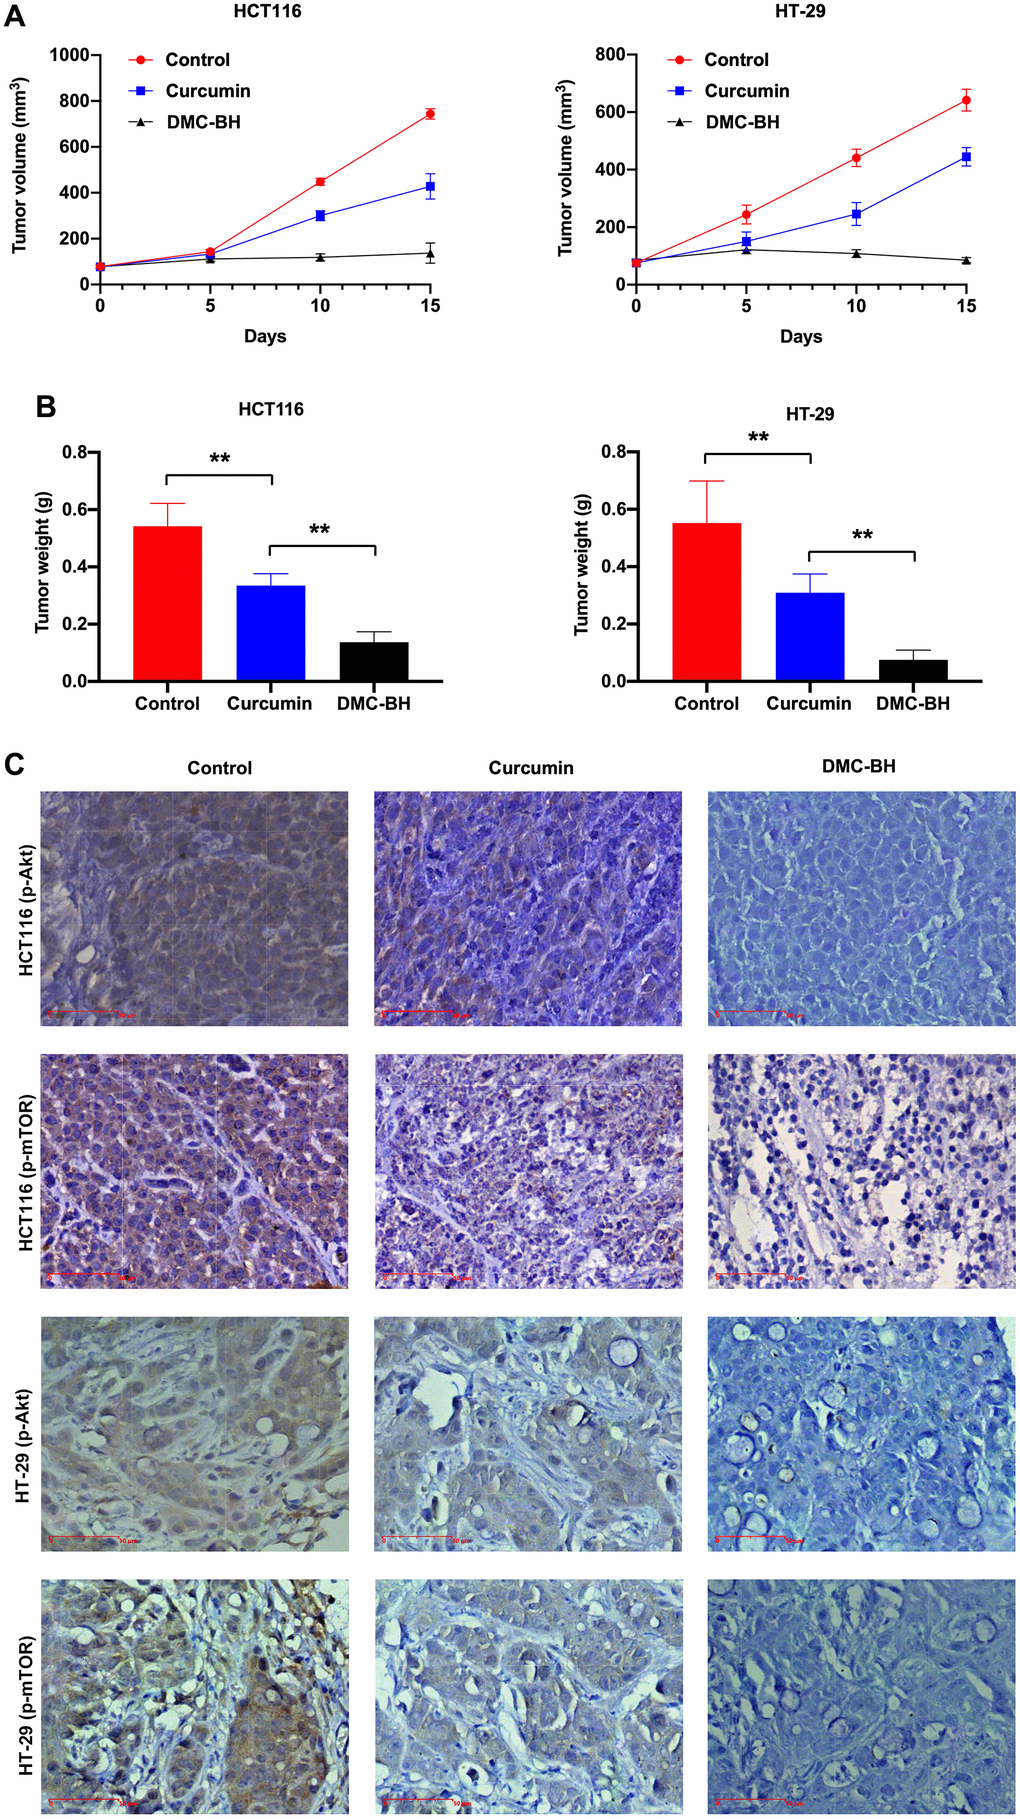 DMC-BH inhibits the growth of xenografts derived from HCT116 and HT-29 cells. (A) Volumes of xenografts derived from CRC cells treated with 20 mg/kg DMC-BH or curcumin. (B) Xenograft weights of CRC cells treated with 20 mg/kg DMC-BH or curcumin. (C) Immunohistochemical analysis of p-AKT and p-mTOR expression in xenografts.